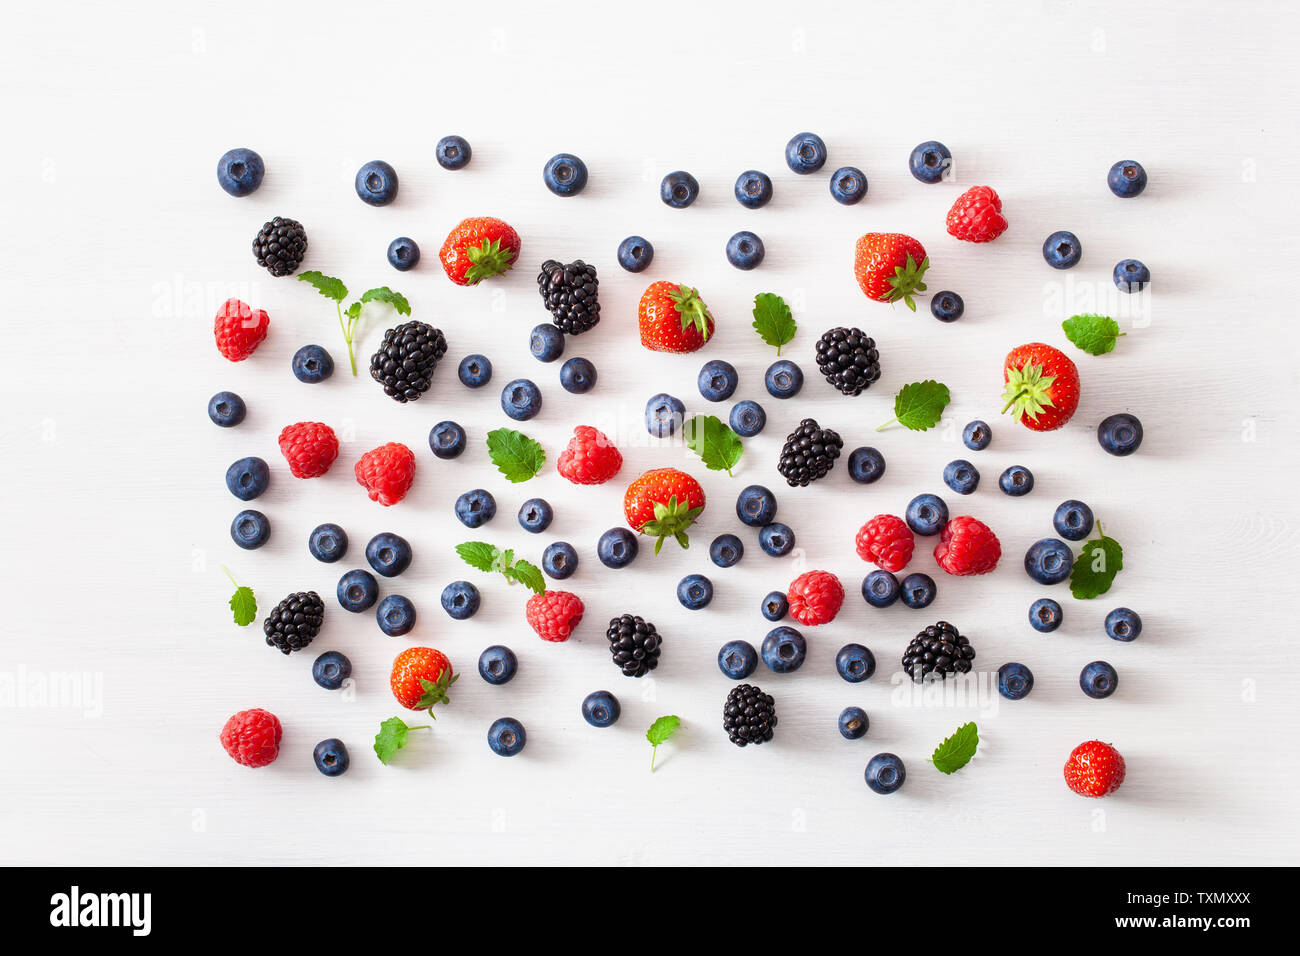 assorted berries over white background. blueberry, strawberry ...